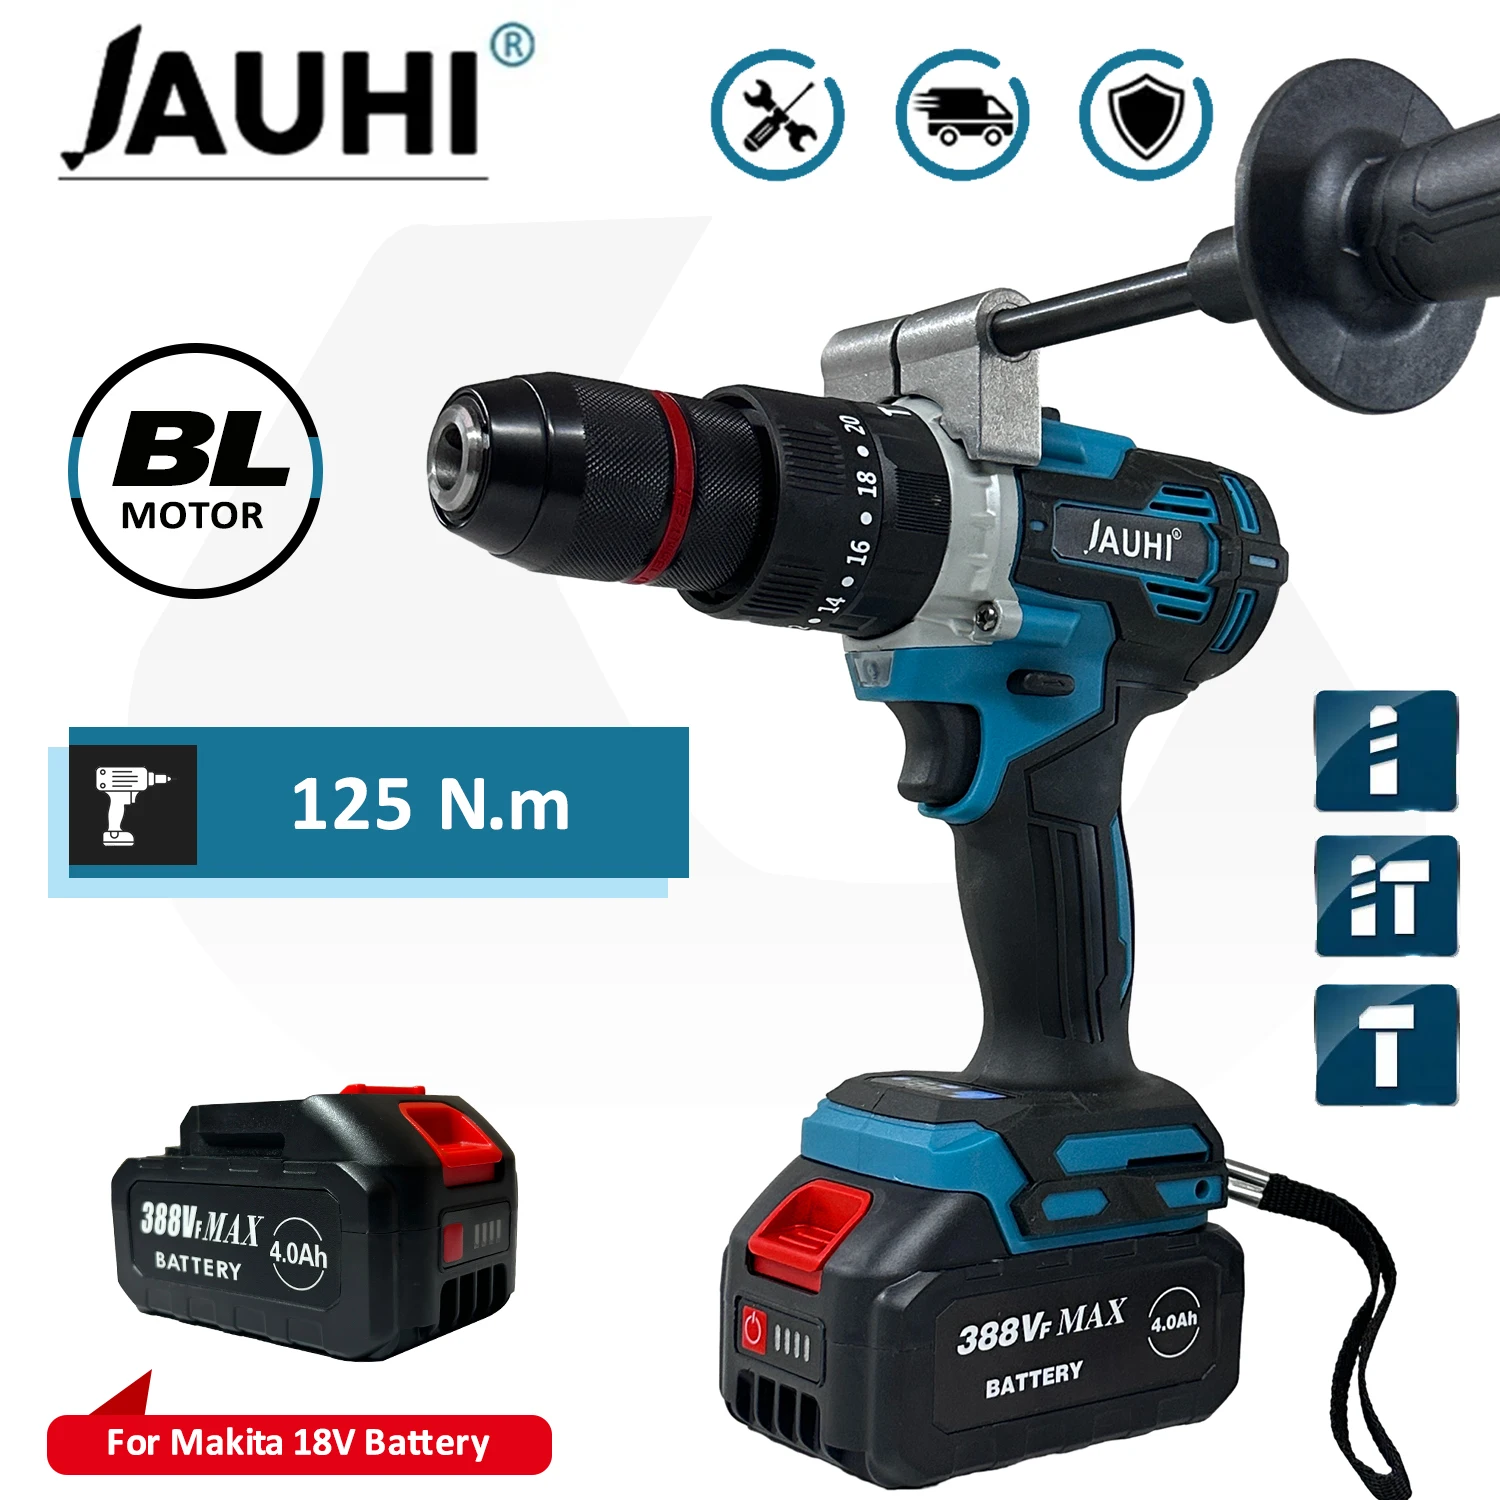 

JAUHI 13mm 125N.m cordless Brushless Electric Impact Drill 20+3 Torque Electric Screwdriver For Makita 18V Battery Power Tools